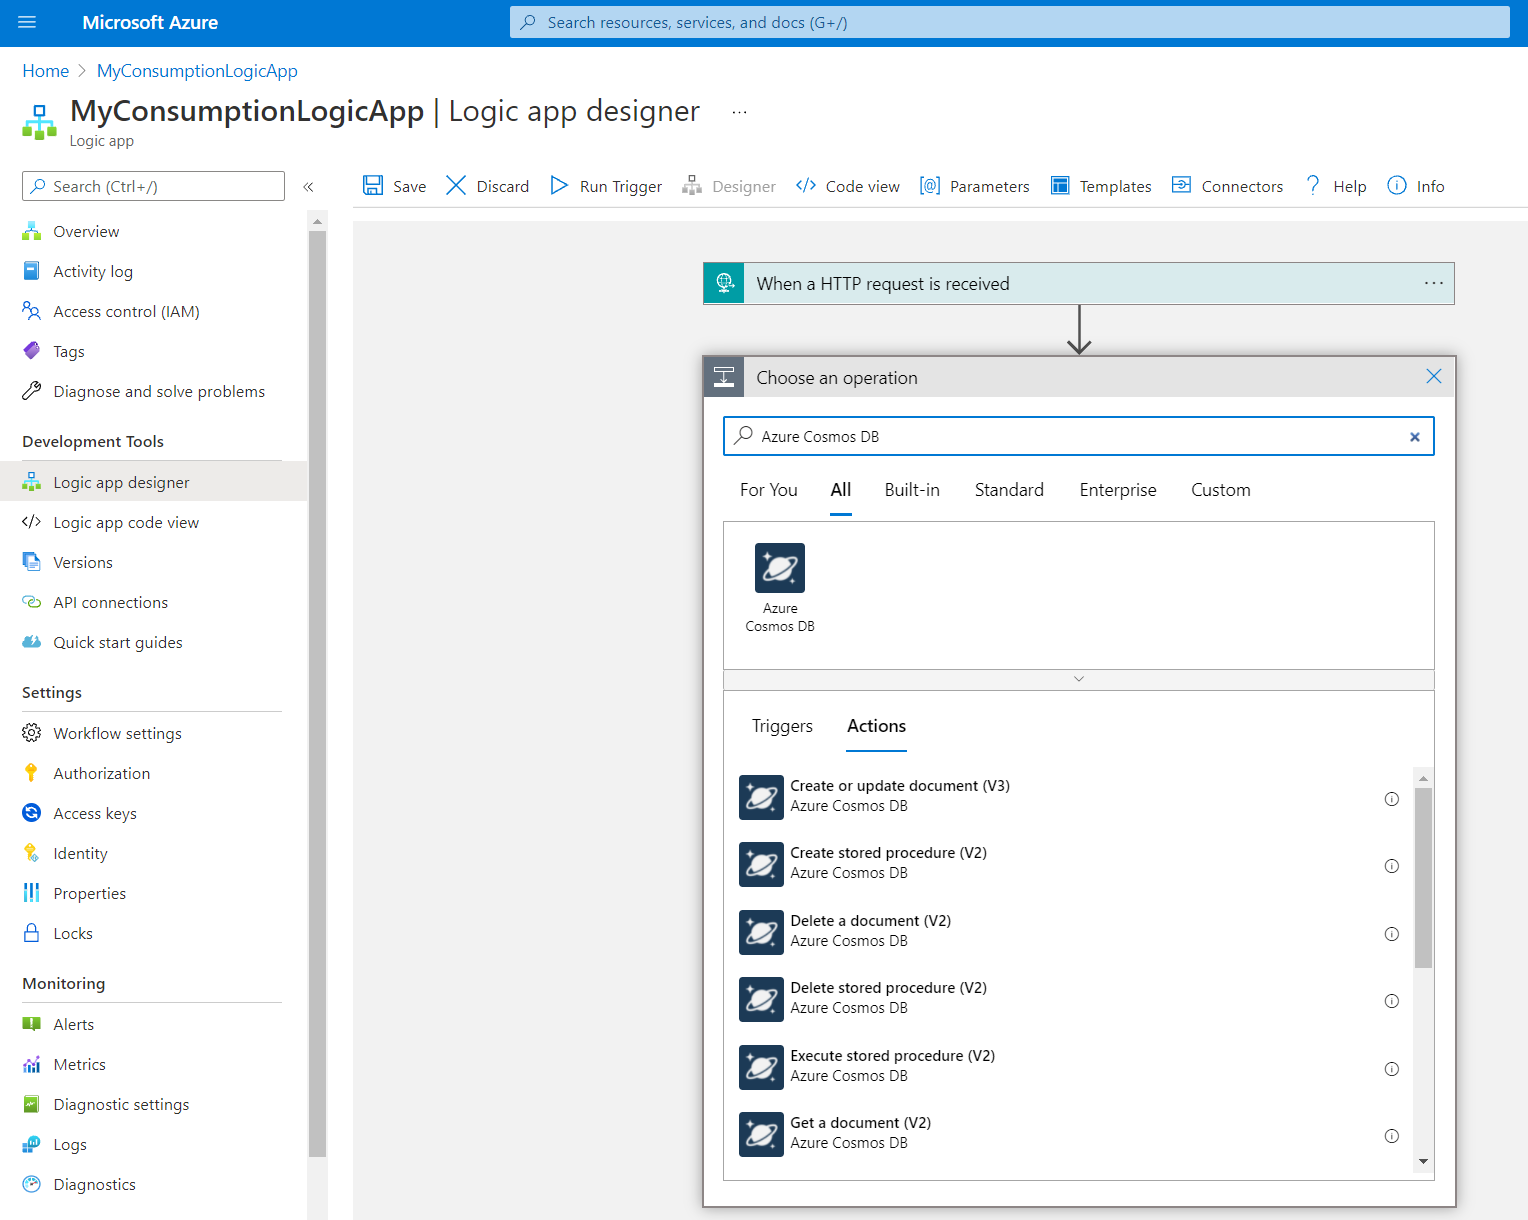 Screenshot showing the designer for a Consumption logic app workflow with the available Azure Cosmos DB actions.